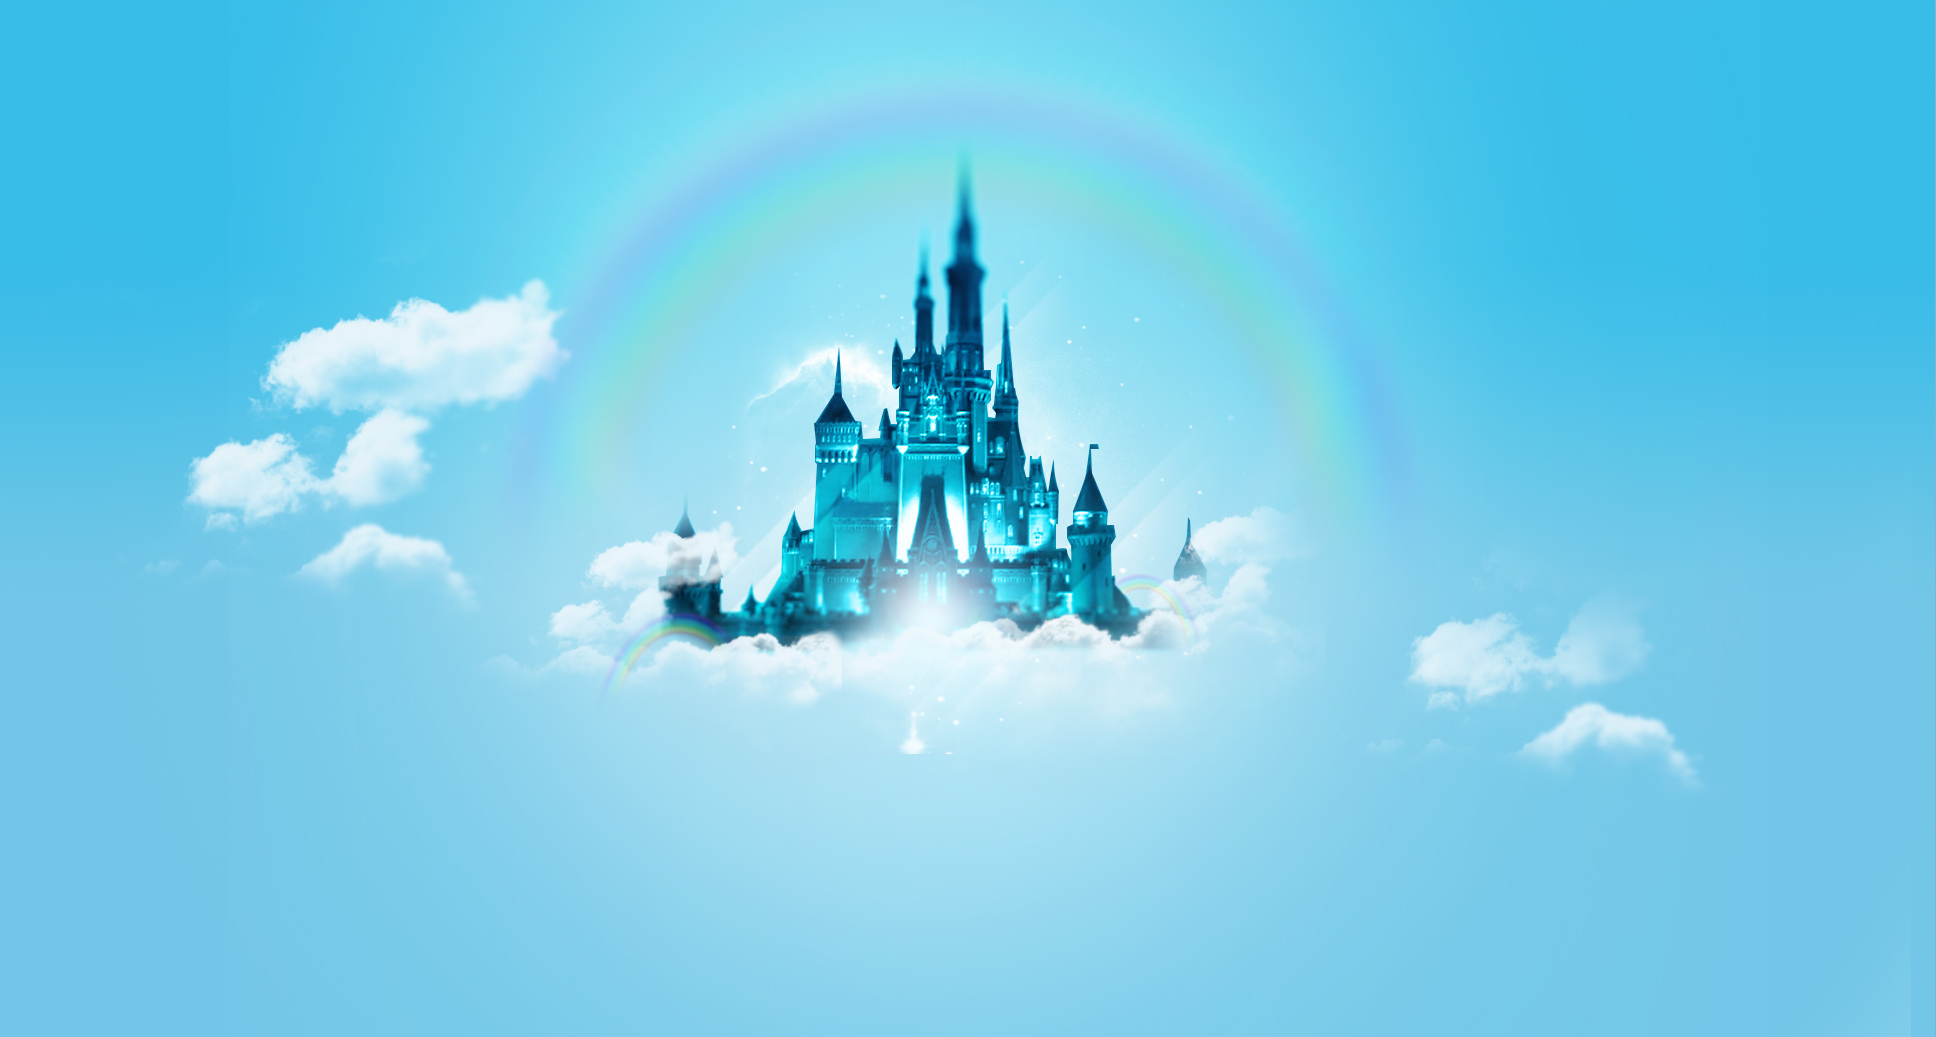 Download Free 50 Disney Wallpaper for Desktop - The Quotes Land